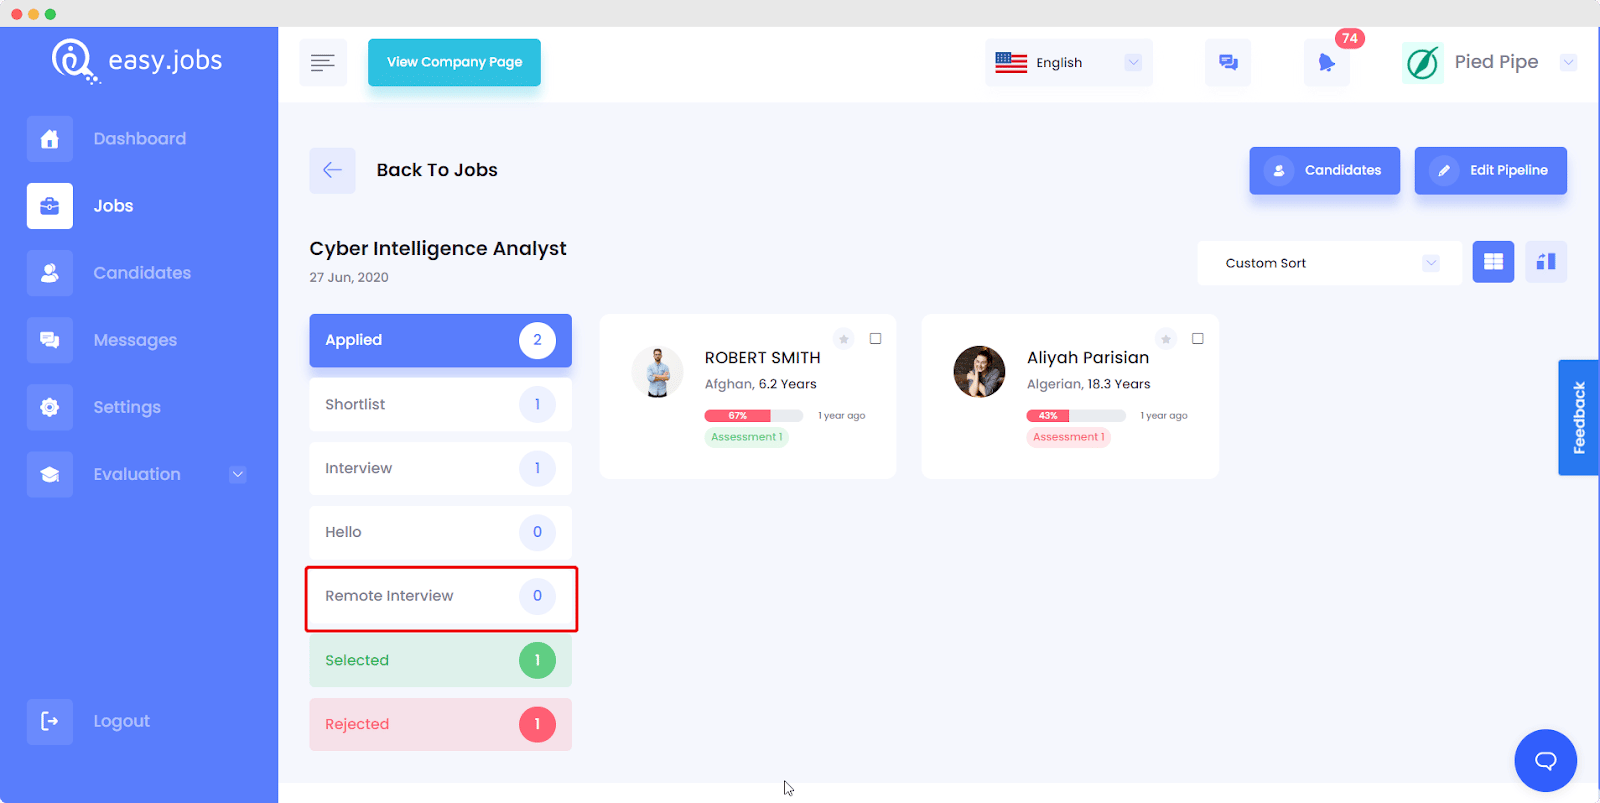 How to Setup Remote Interviews In easy.jobs? 1